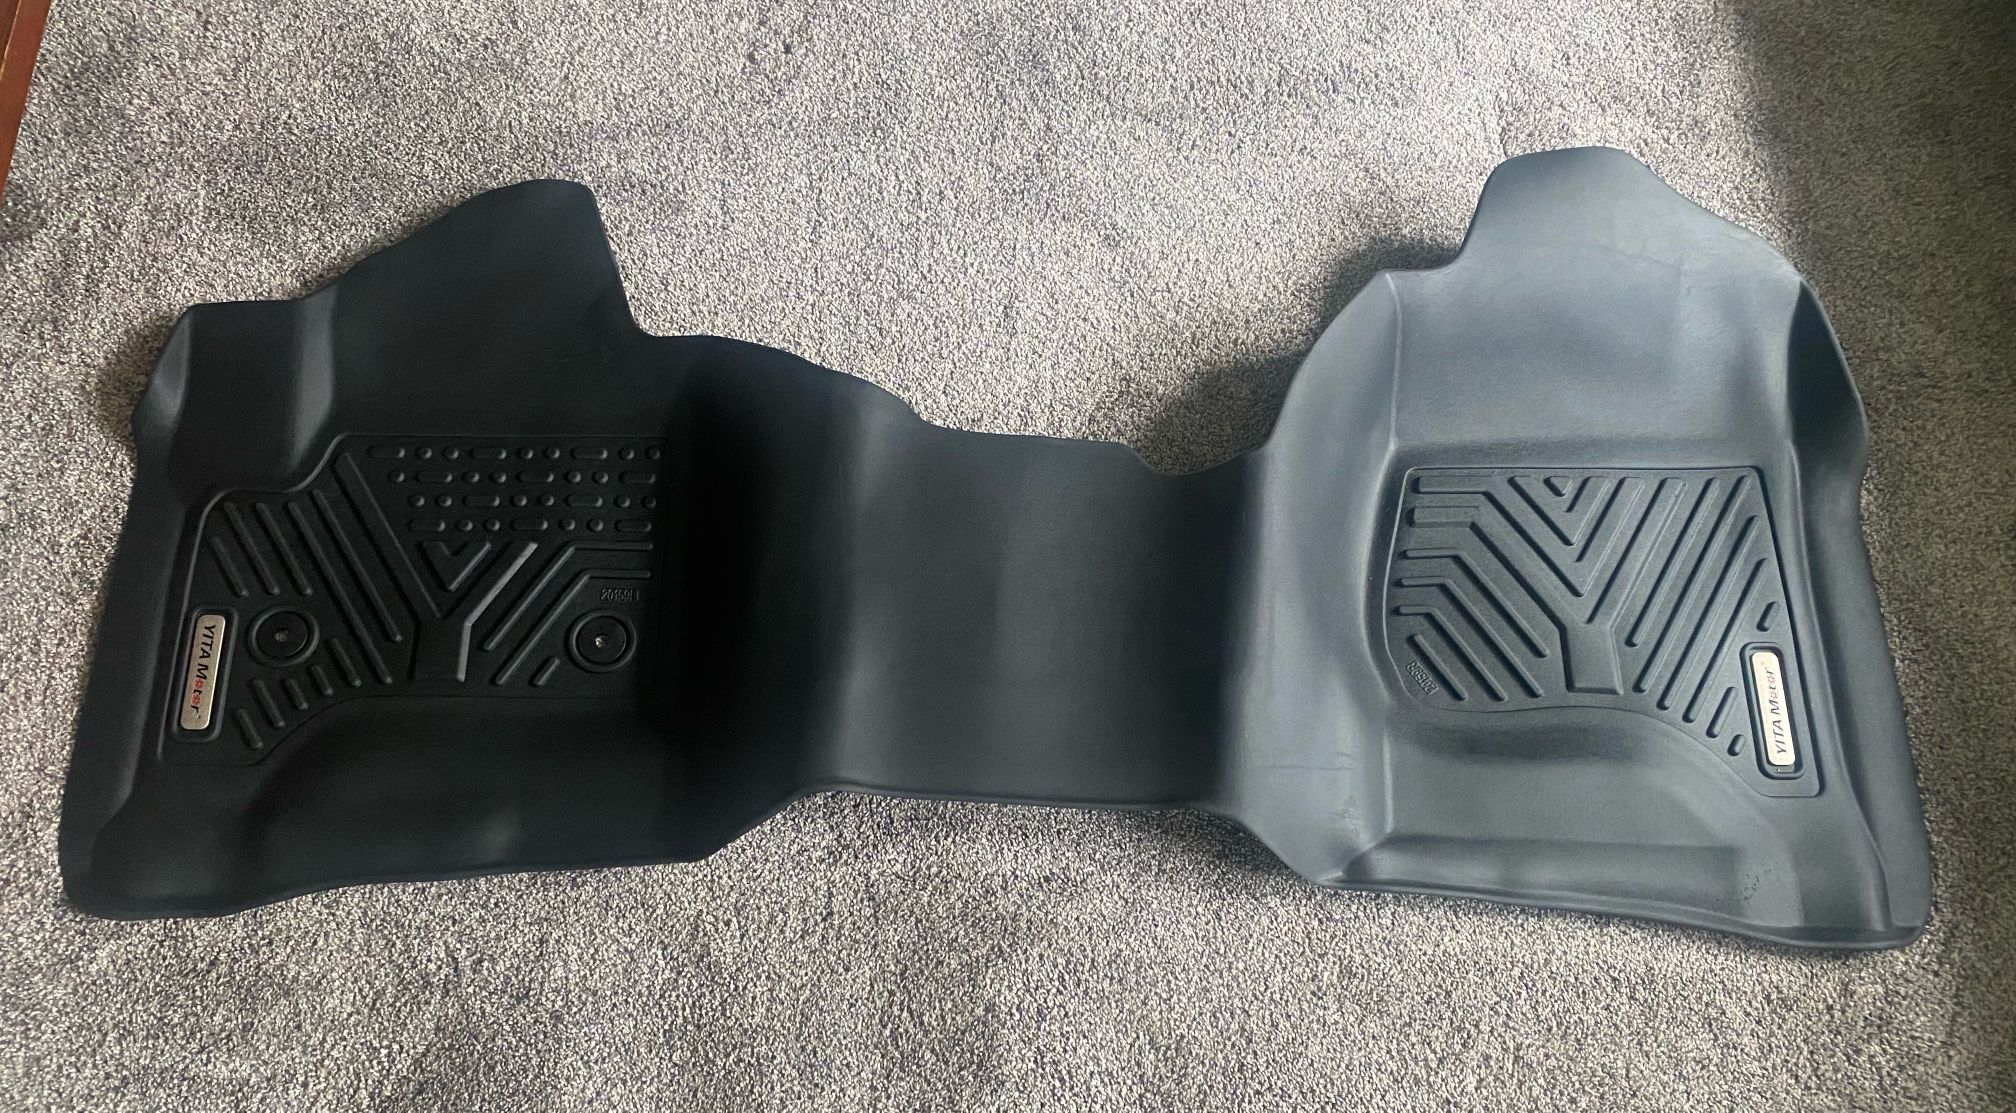 Chevy/GMC Silverado Sierra 1(contact info removed)-3500 1st row floor liner